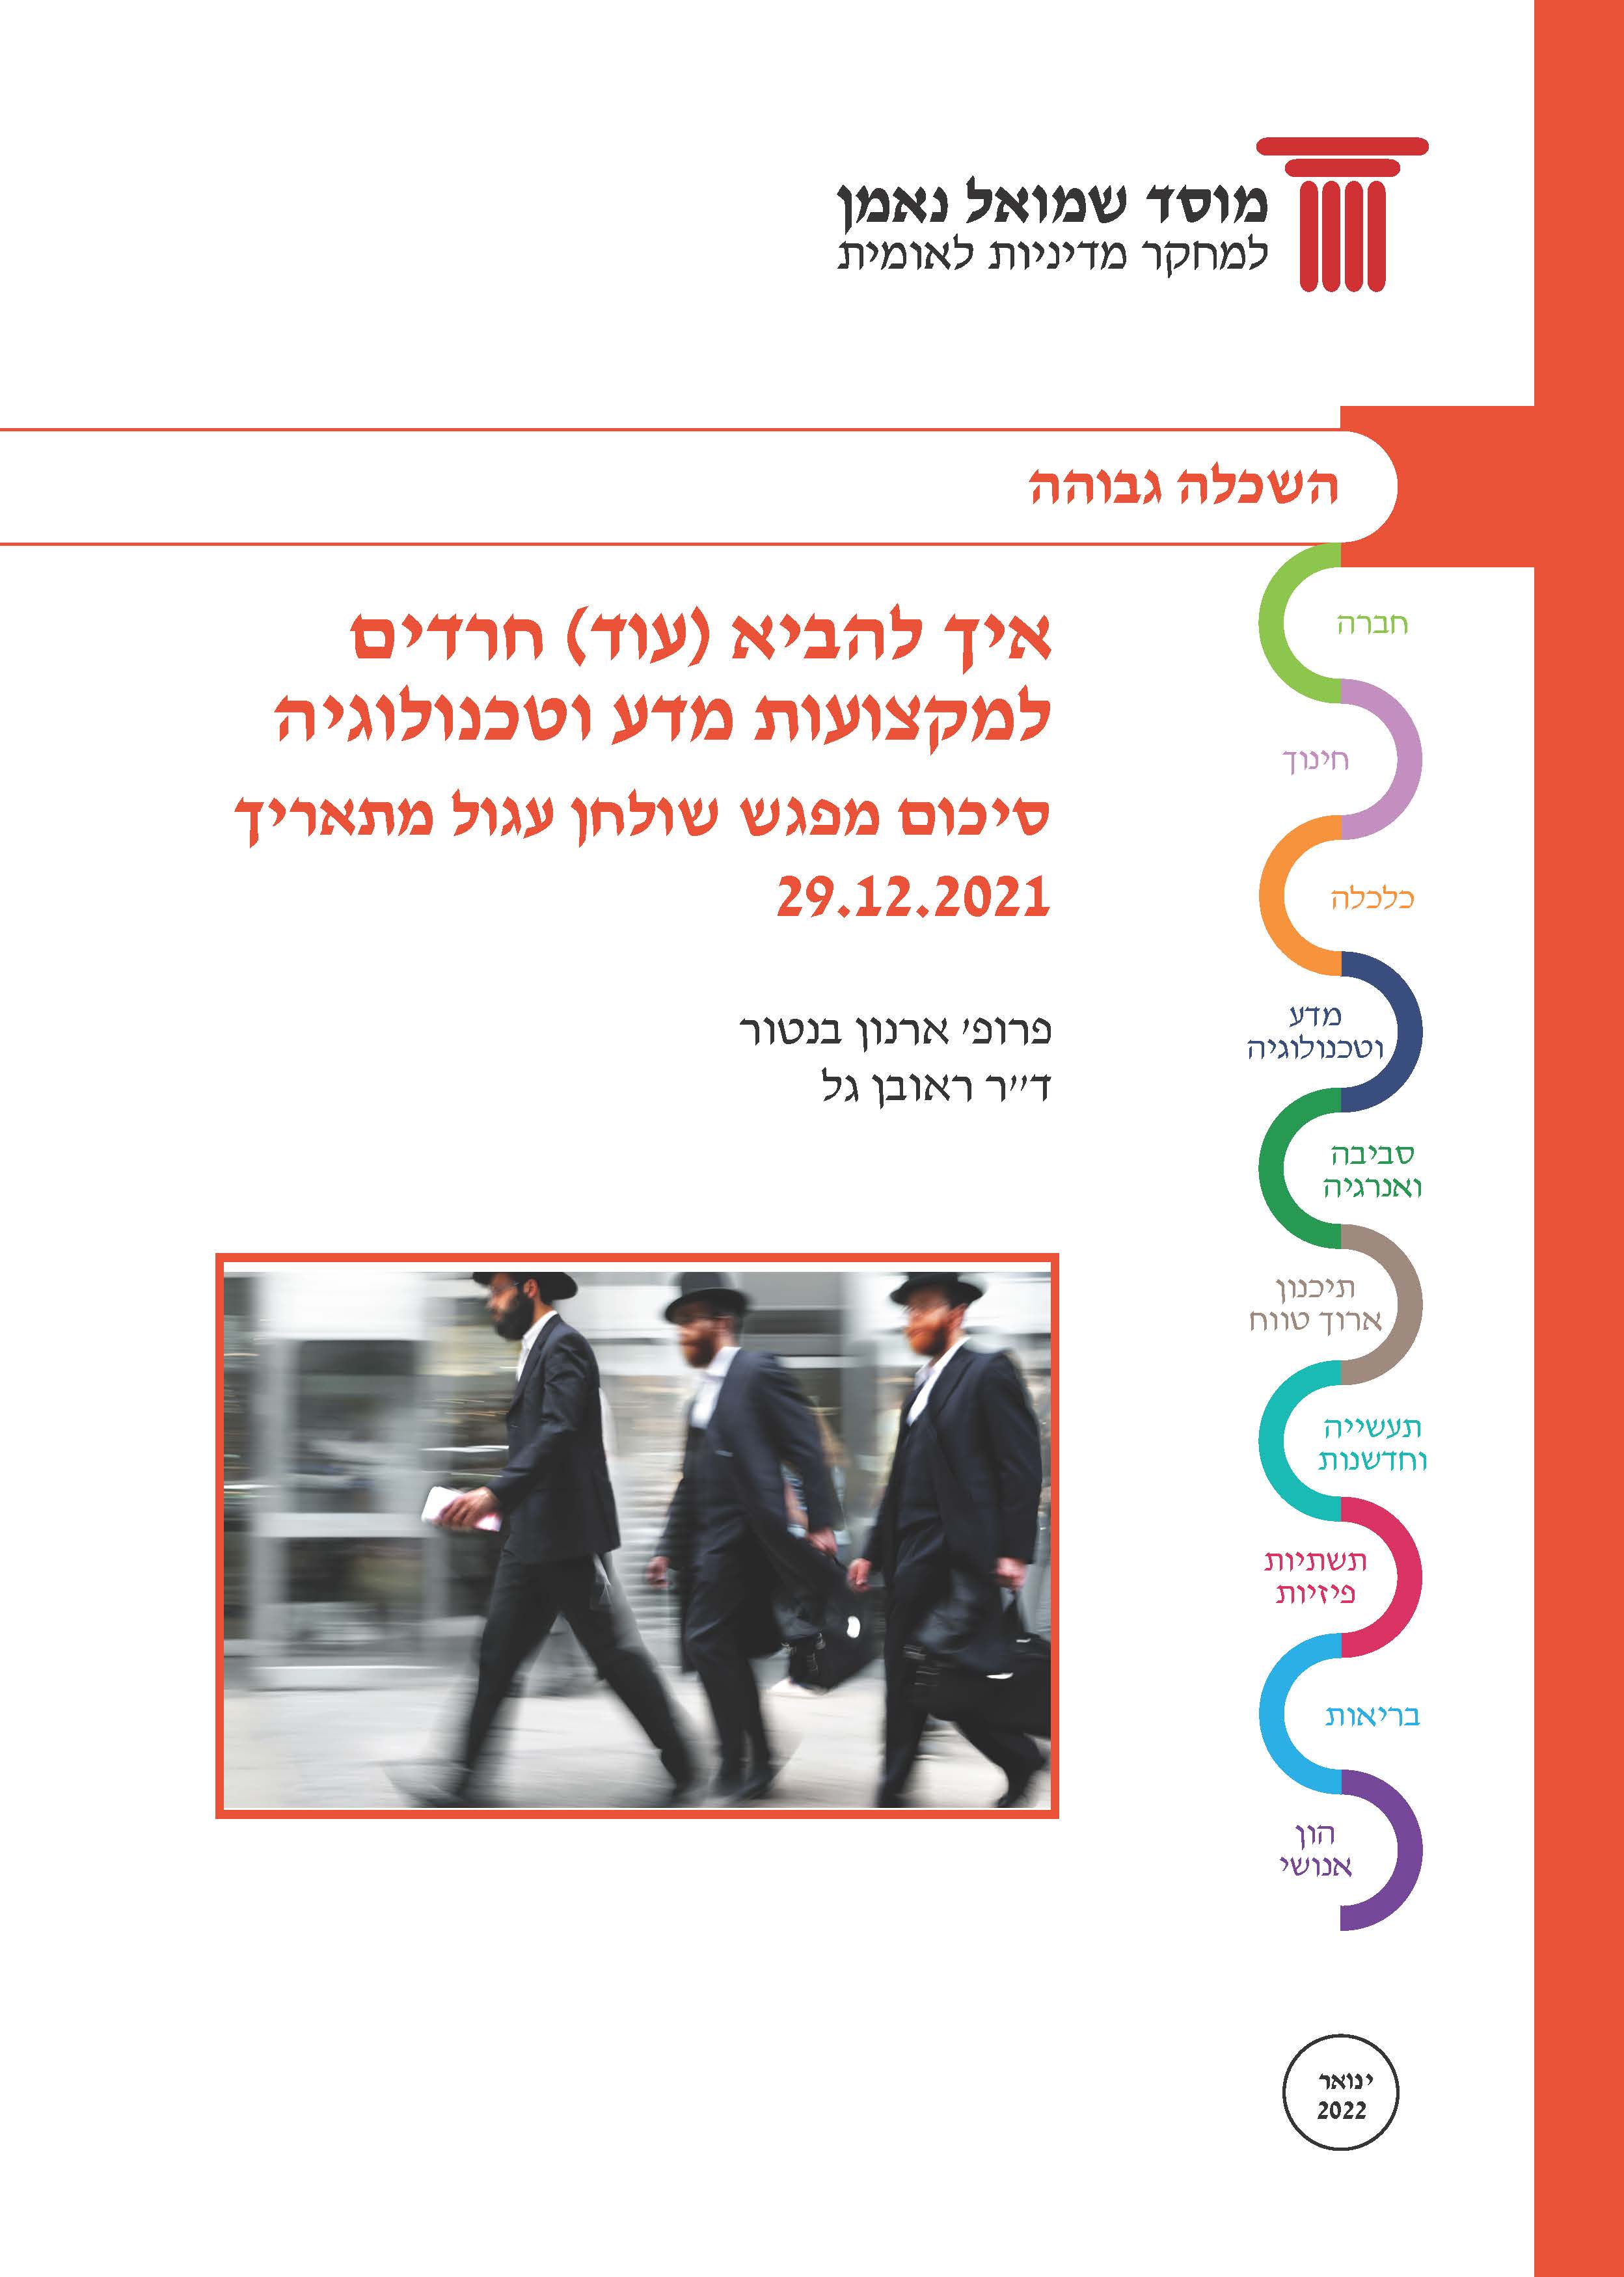 How to bring (more) Ultra-Orthodox students to science and technology studies? Summary of a Round Table meeting, 19.12.2021